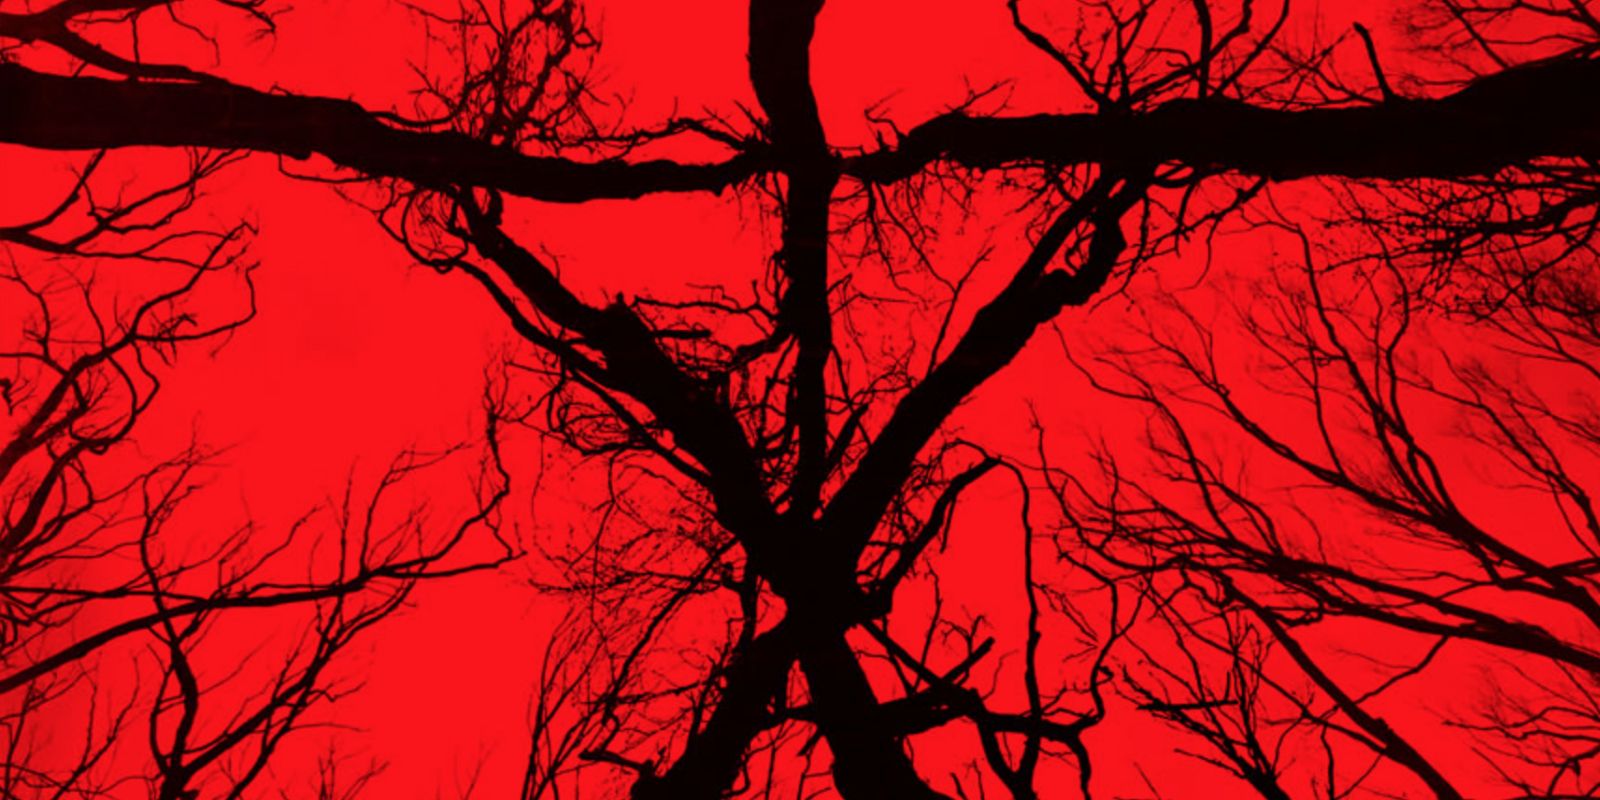 Blair Witch (2016) trailers and posters